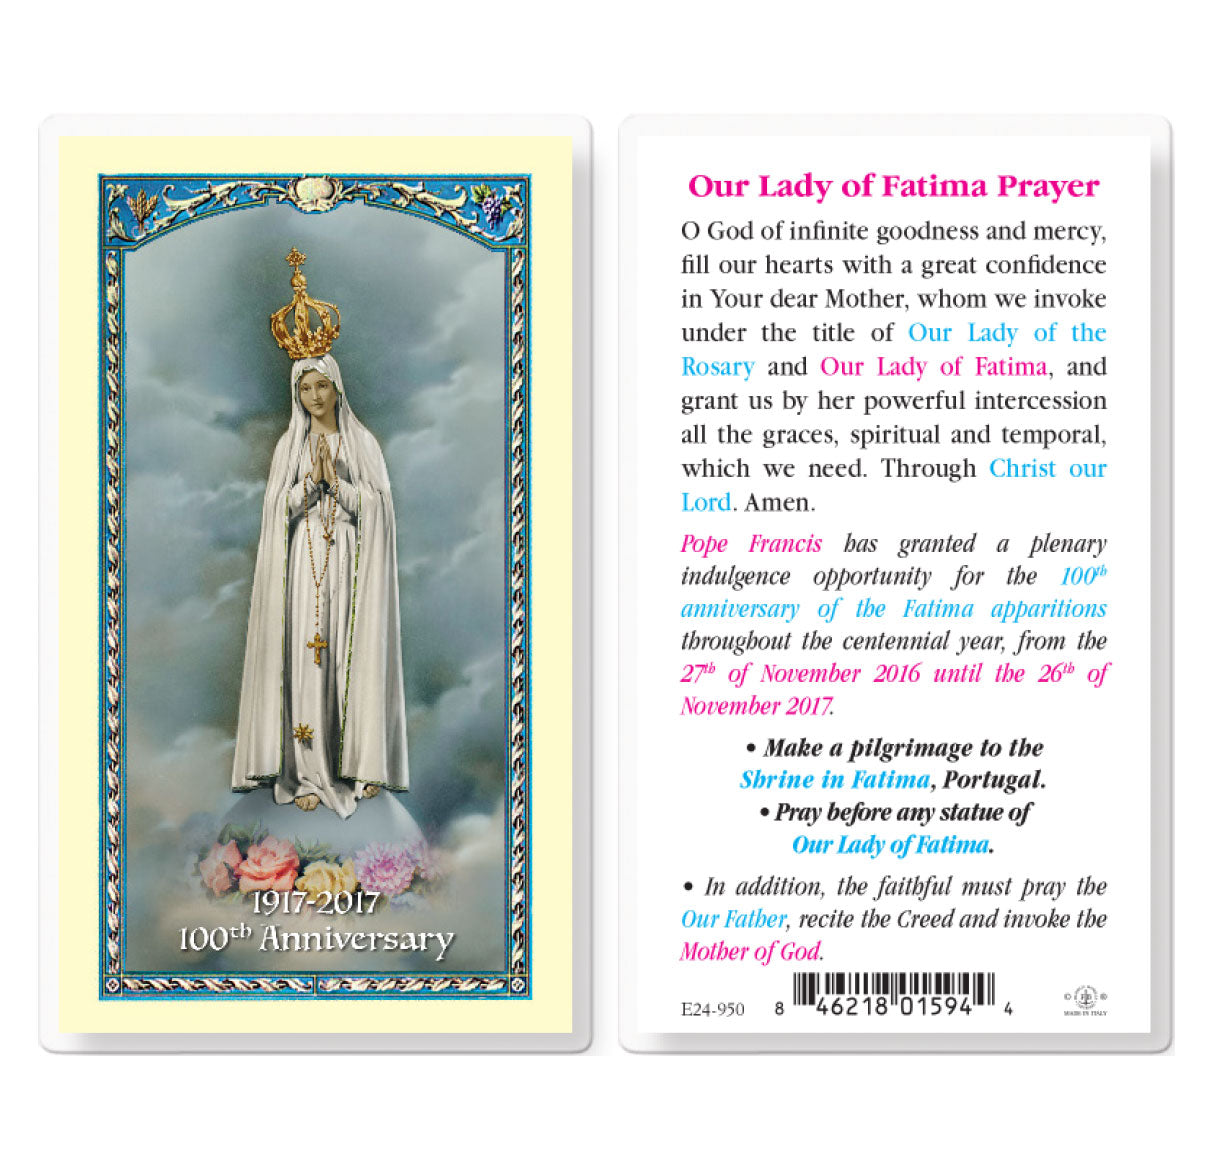 Our Lady of Fatima 100th Anniversary Laminated Catholic Prayer Holy Card with Prayer on Back, Pack of 25